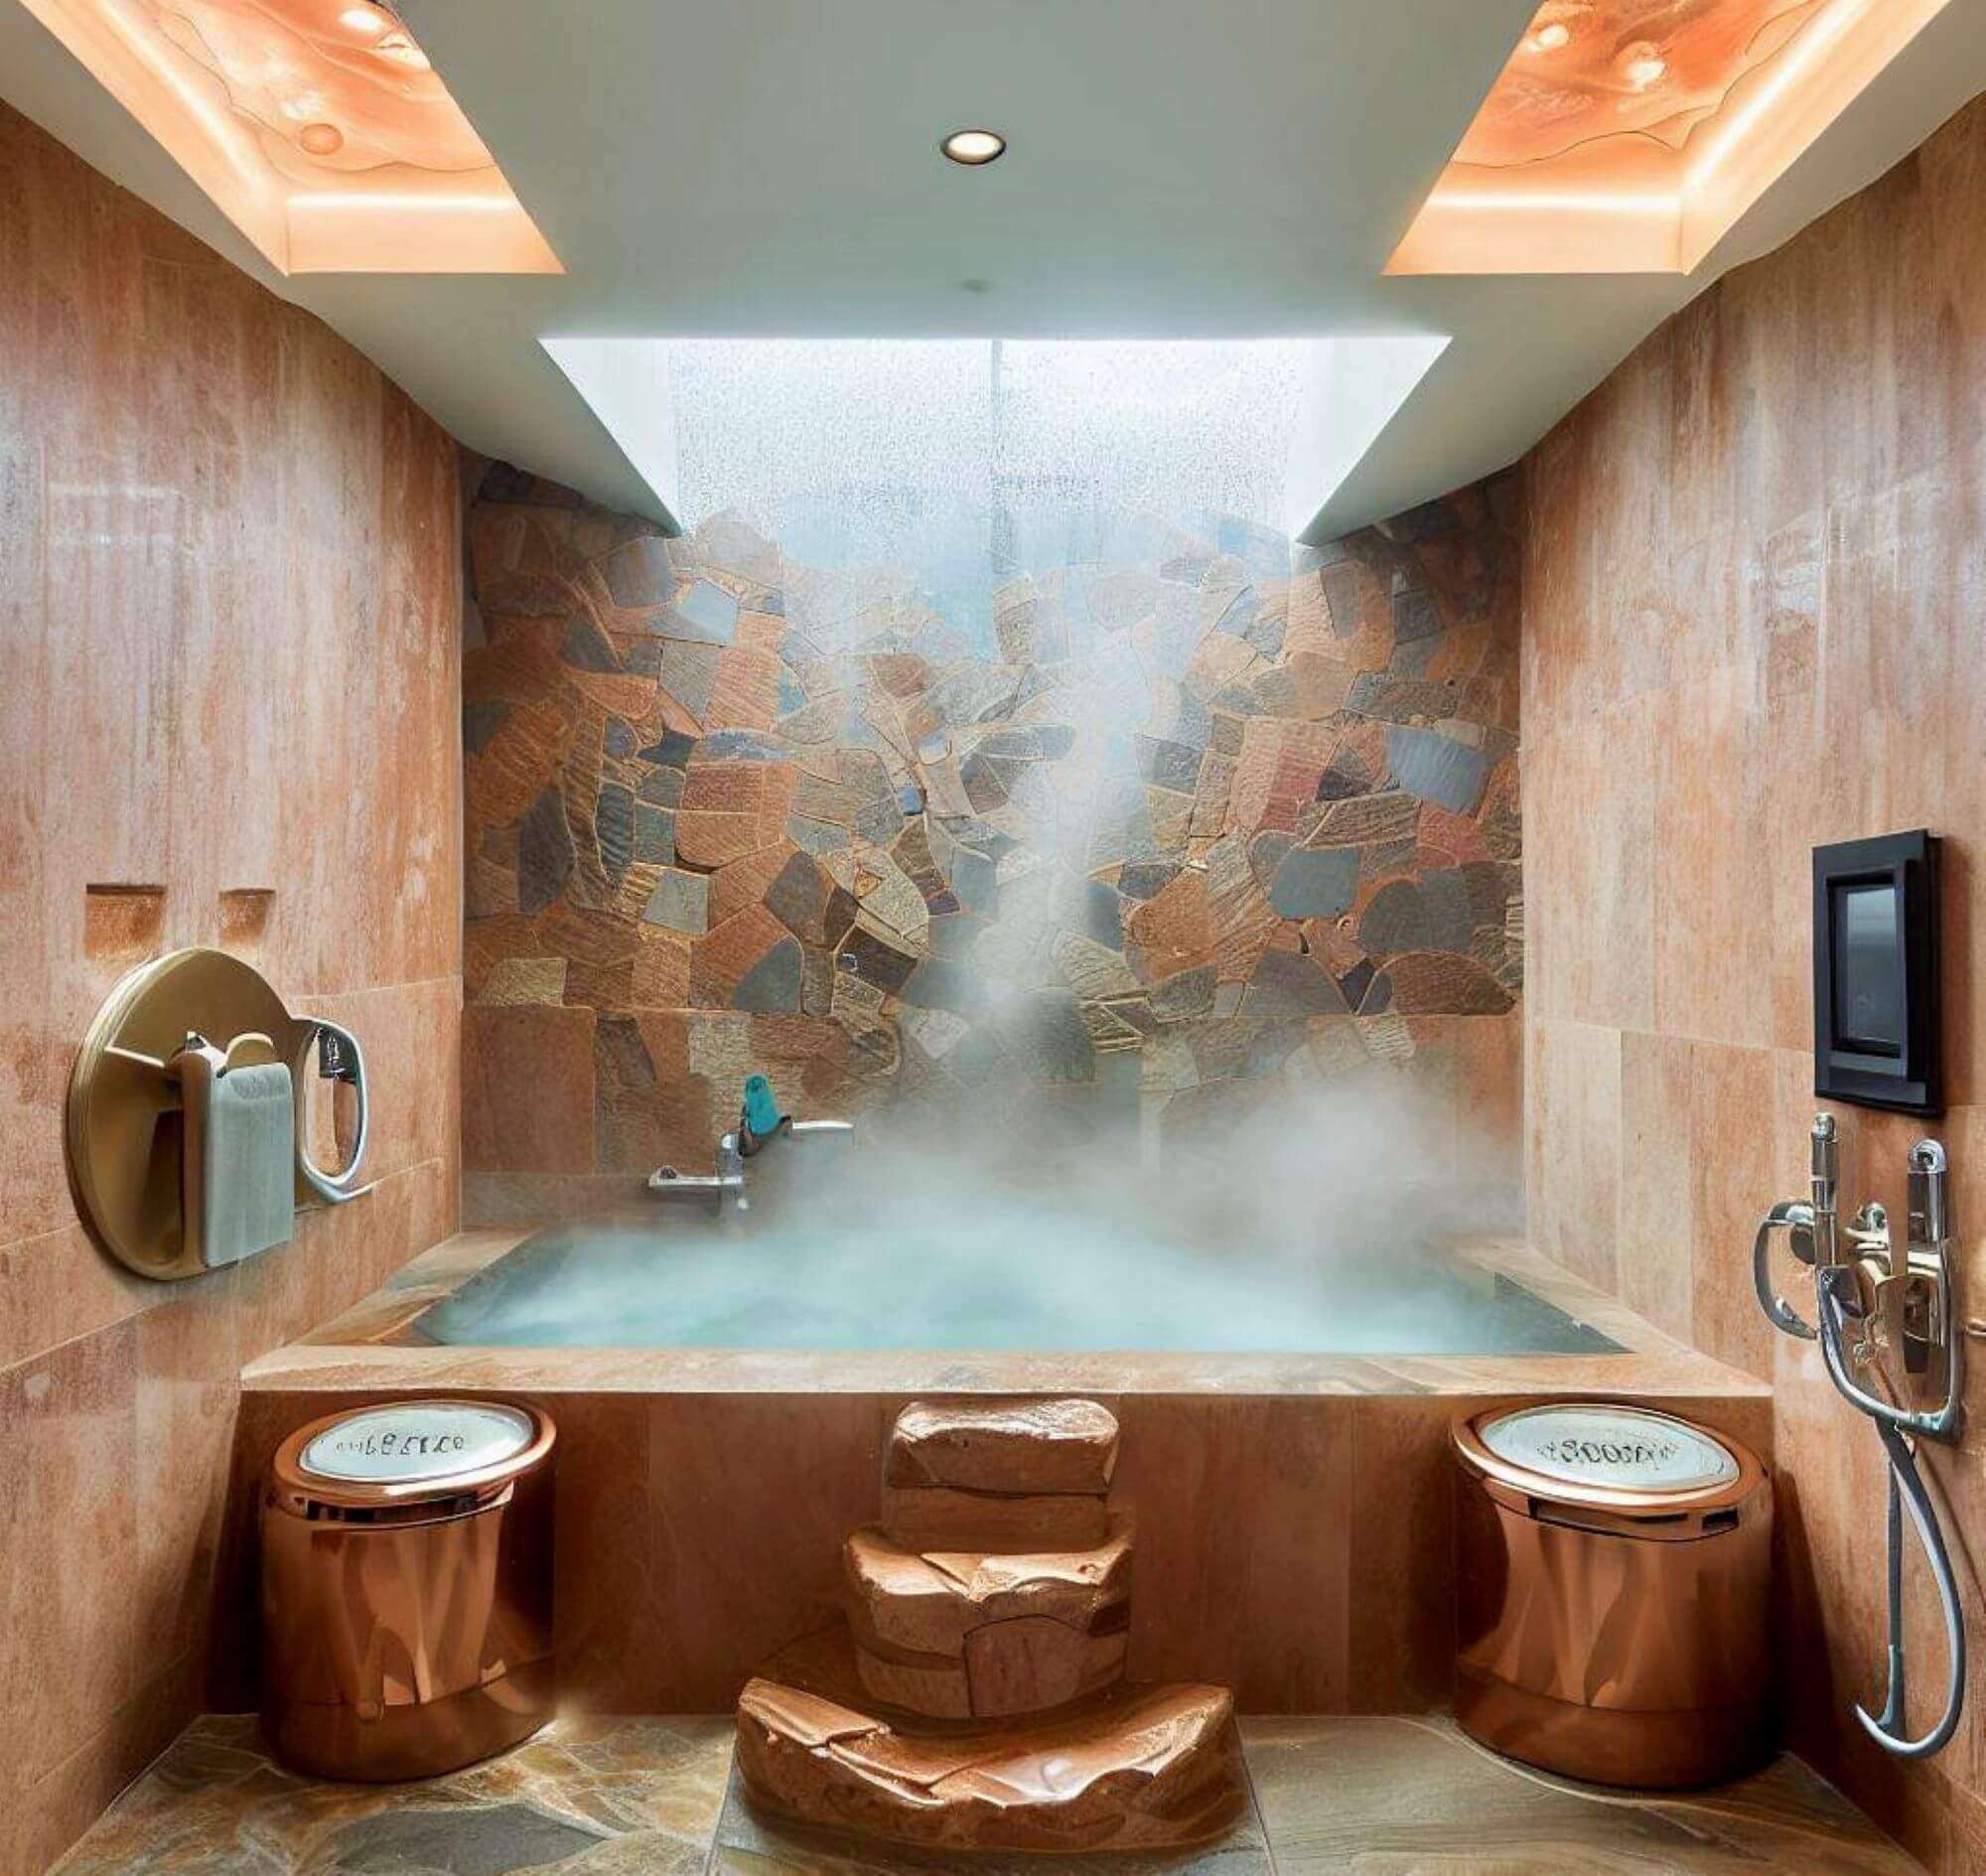 steaming sauna bath tub carved in wood , with wooden walls and decor